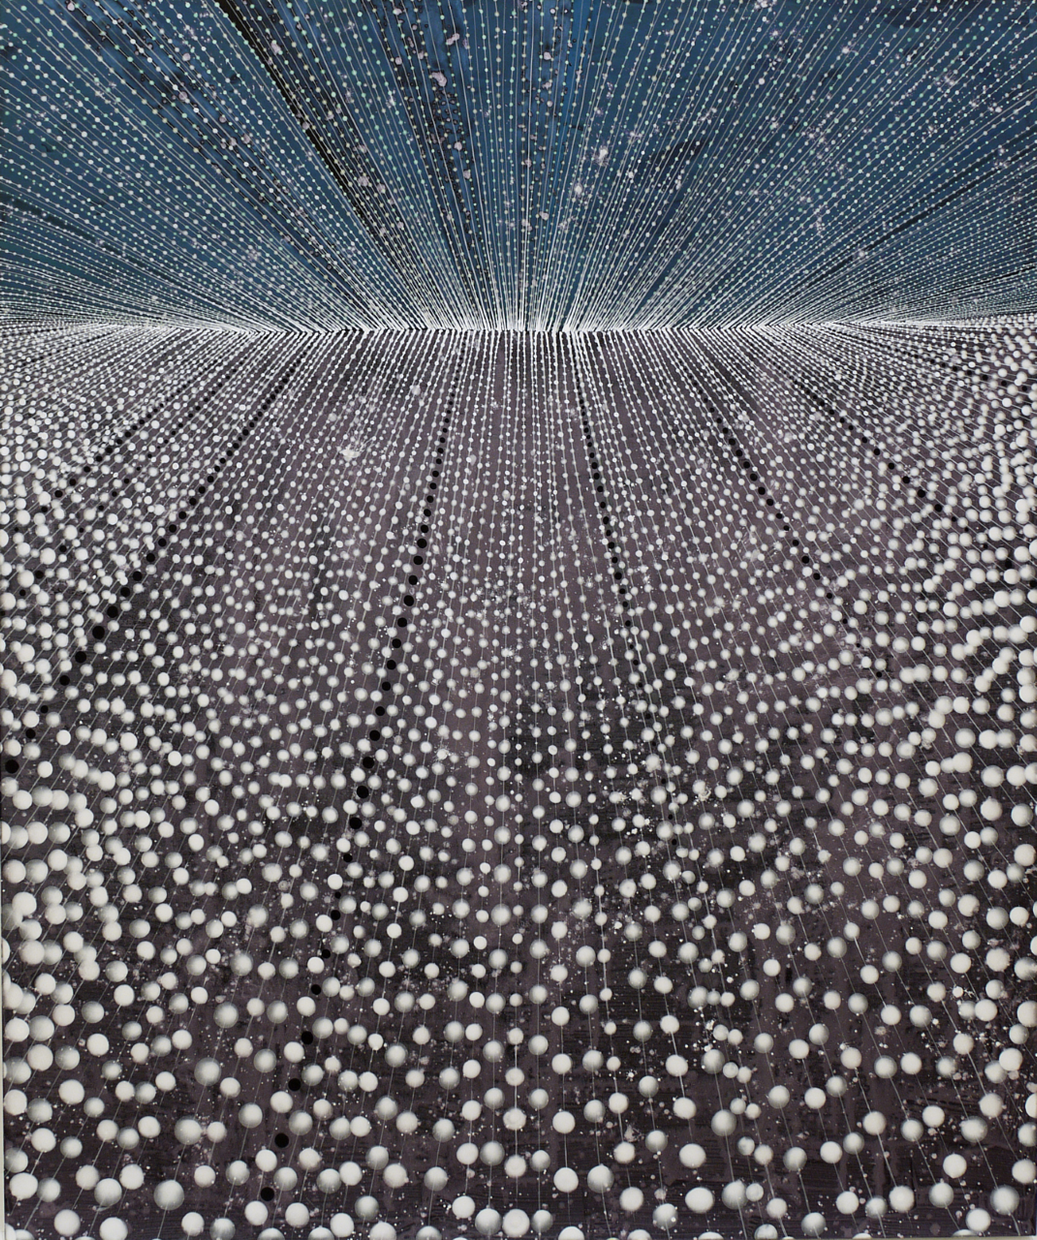 Strings of small, white spheres on a dark gray background stretch from the bottom of the image, growing smaller in the distance, meeting with similar strings on a blue background coming from the top of the image at a distant, bright, white point.